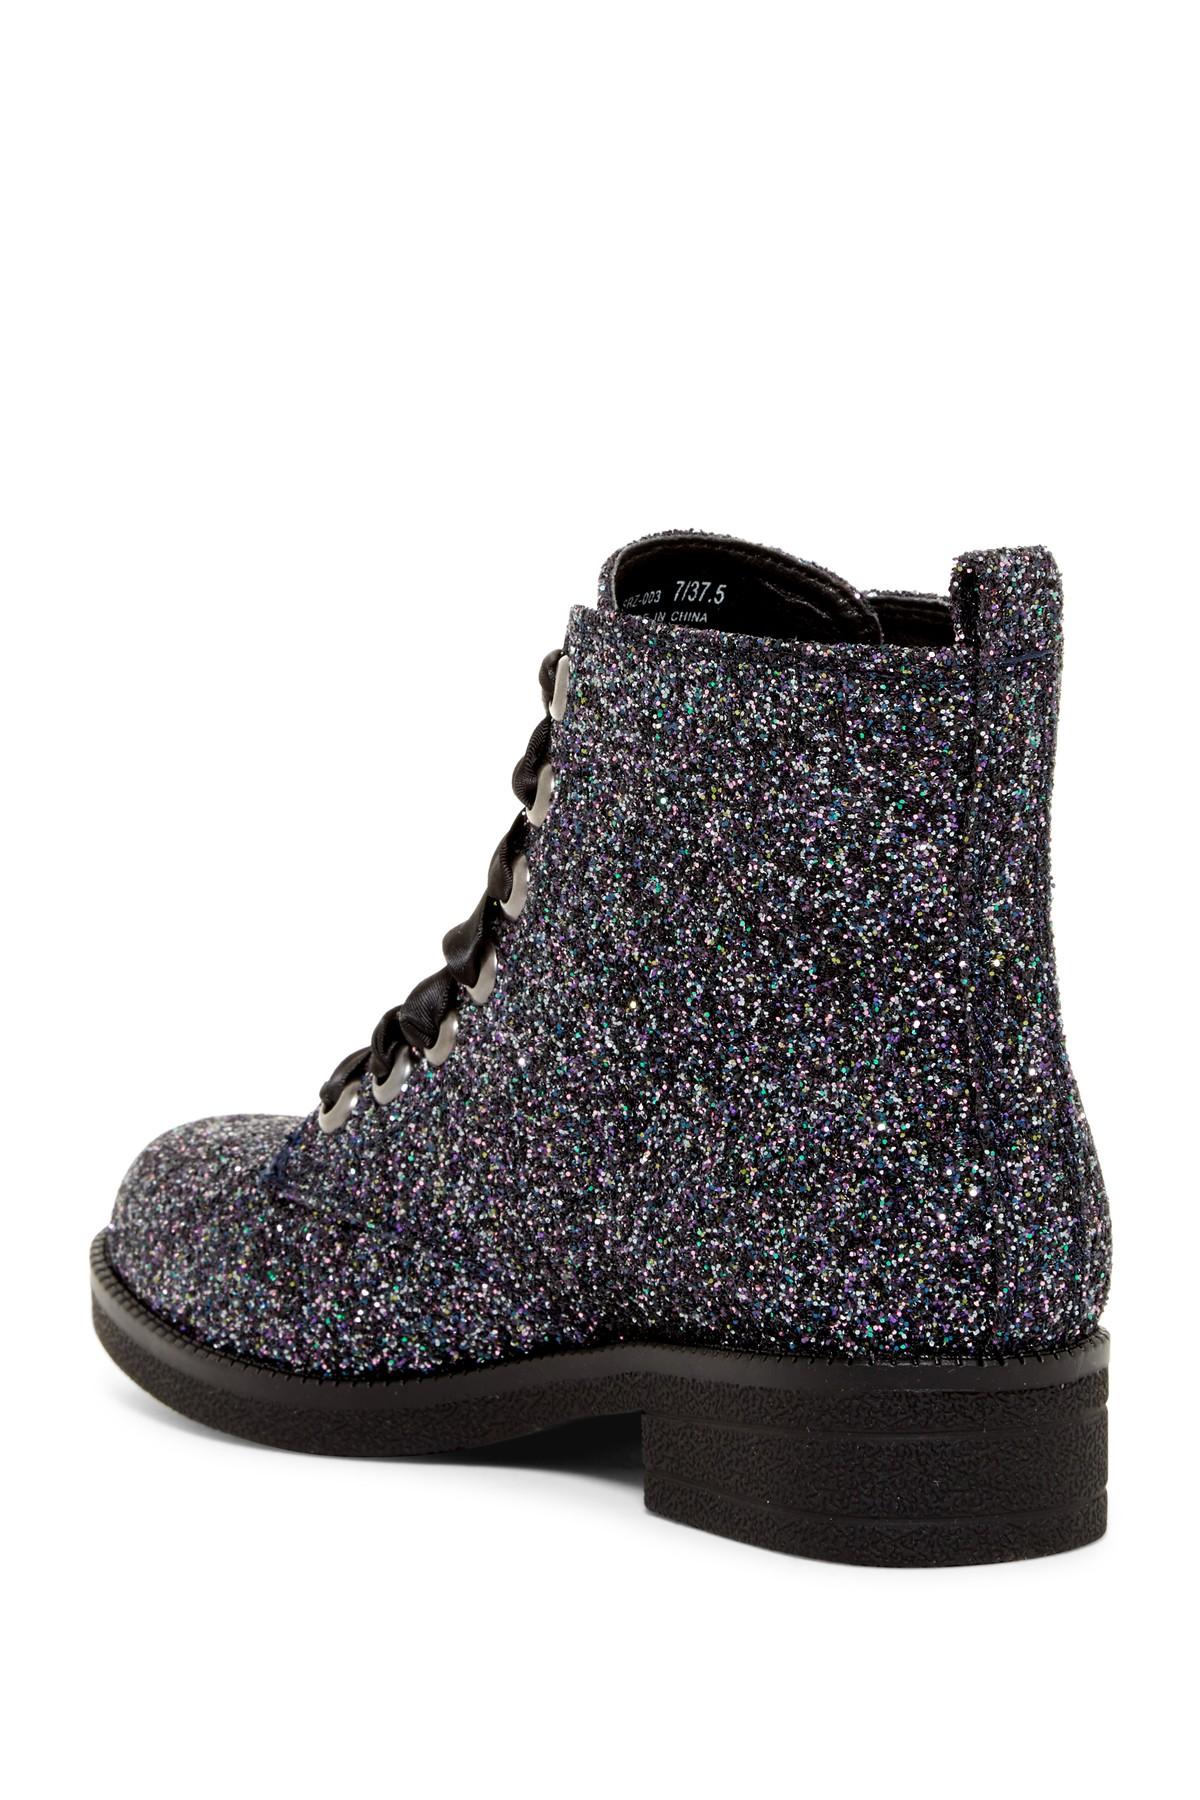 dirty laundry glitter boots